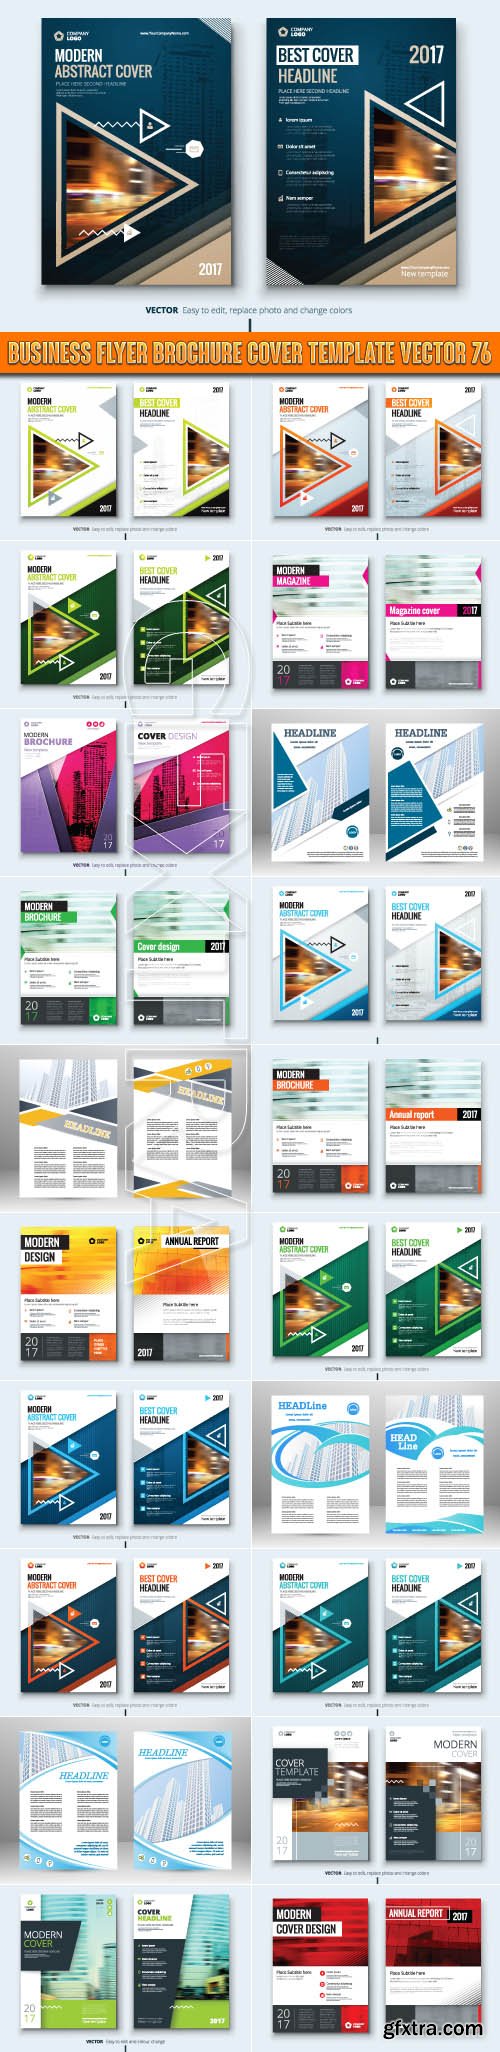 Business flyer brochure cover template vector 76